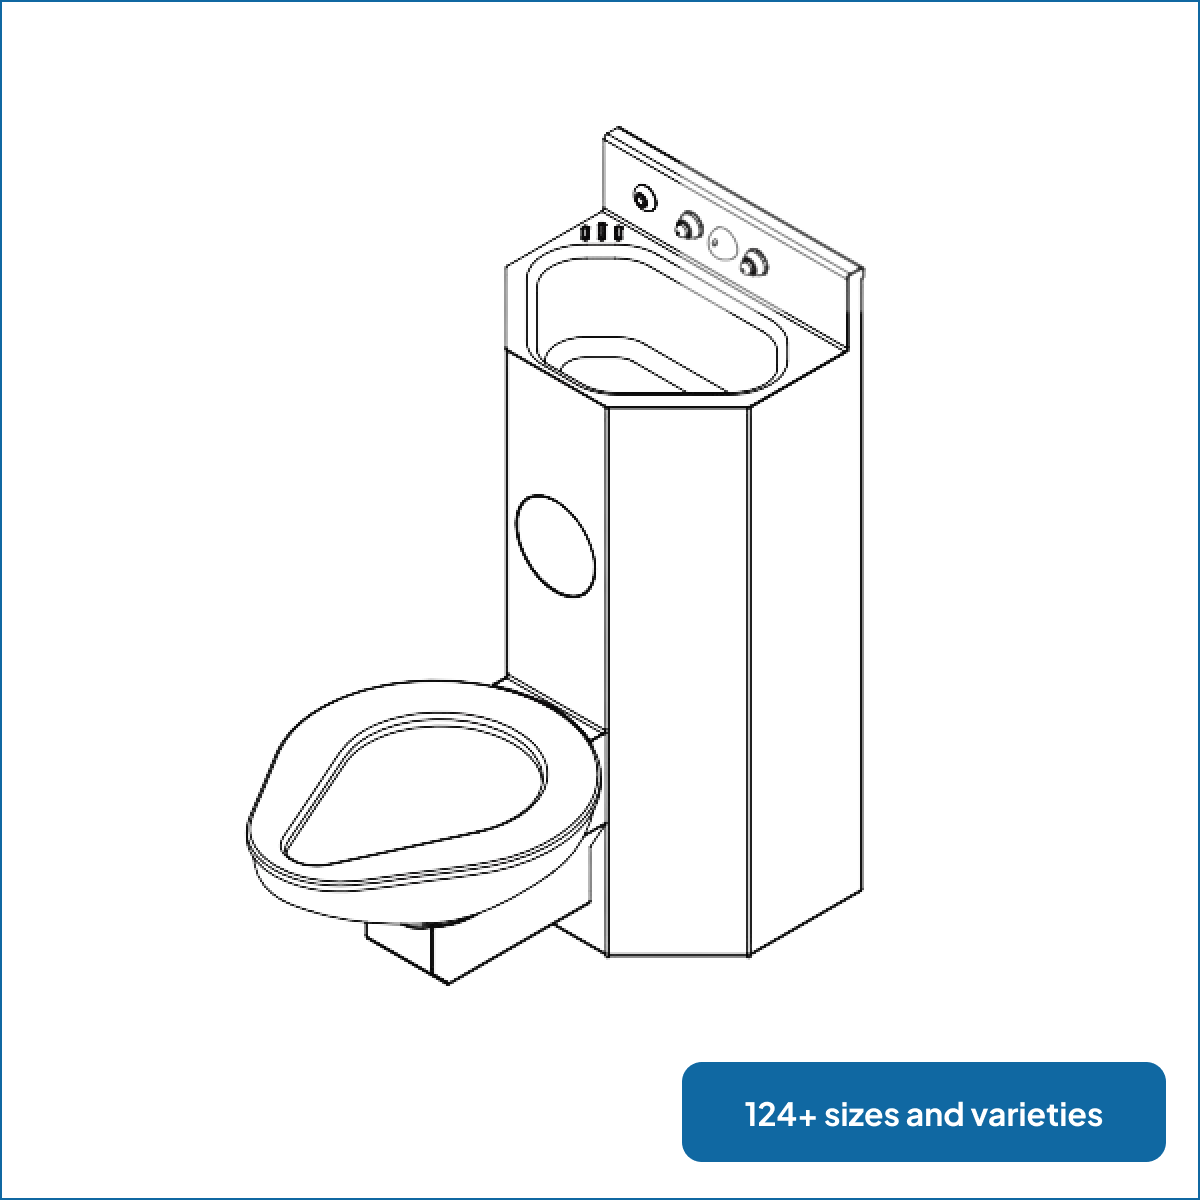 Diagram of Lavatory Toilet Units with sinks available for detention centers